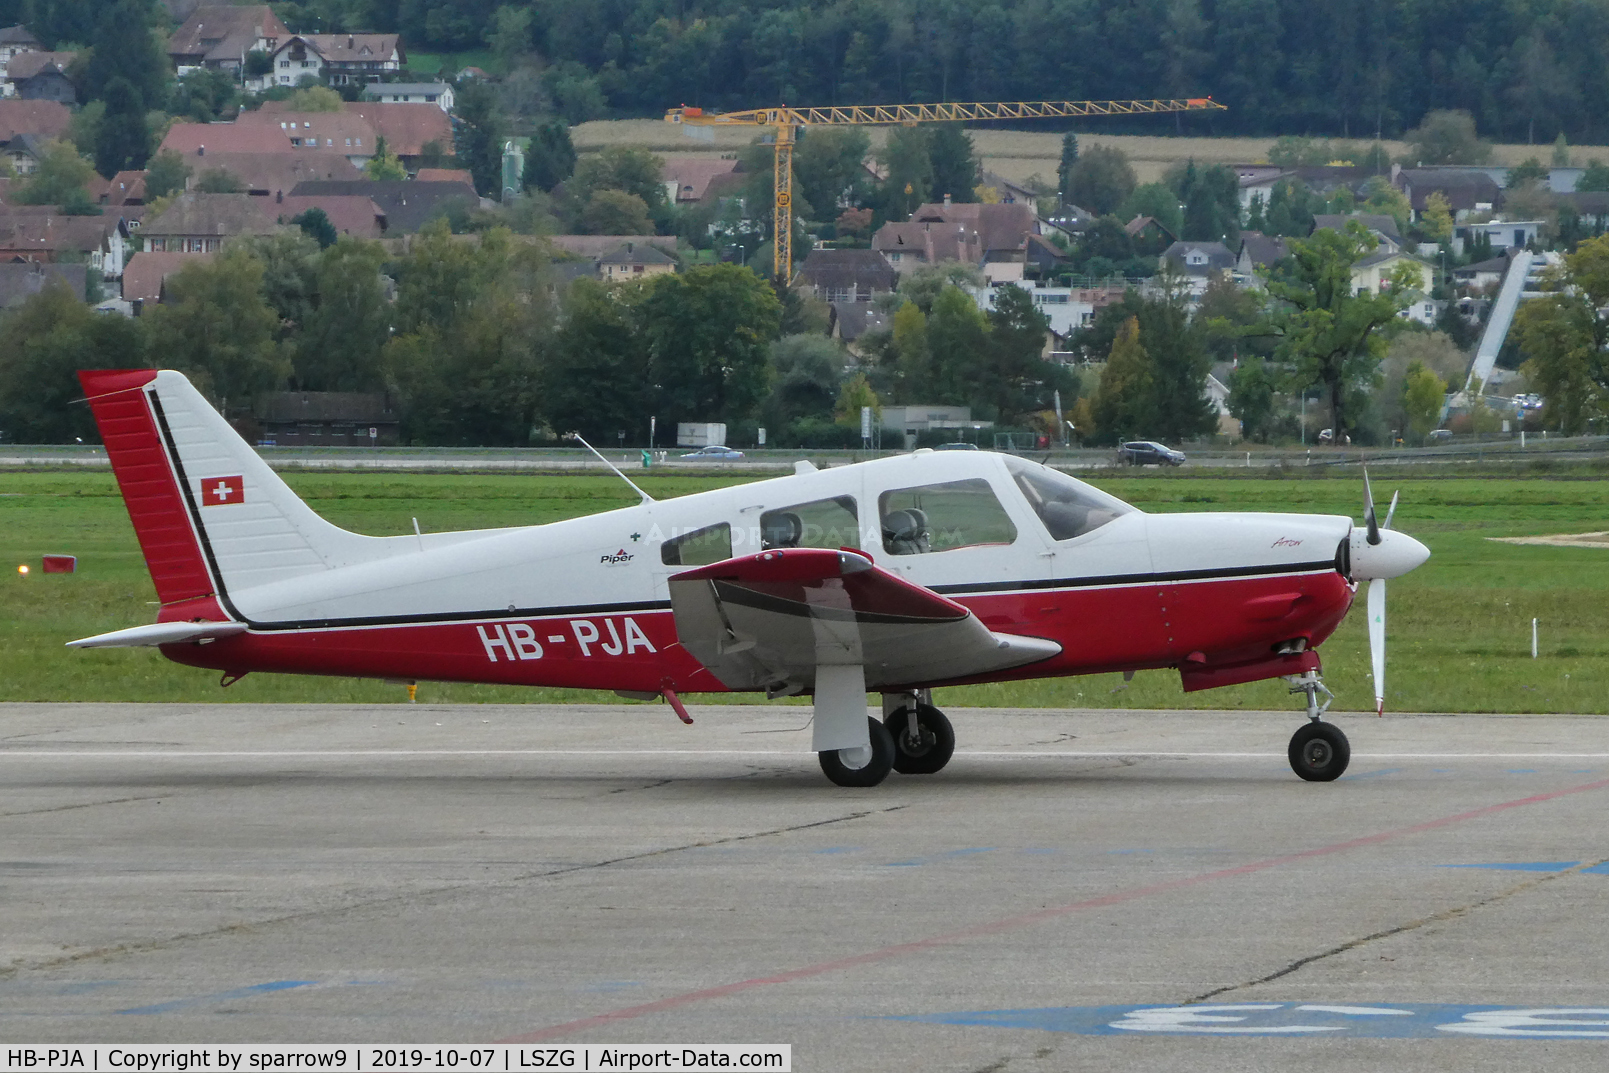 HB-PJA, 2002 Piper PA-28R-201 Cherokee Arrow III C/N 28-44089, Parked at Grenchen